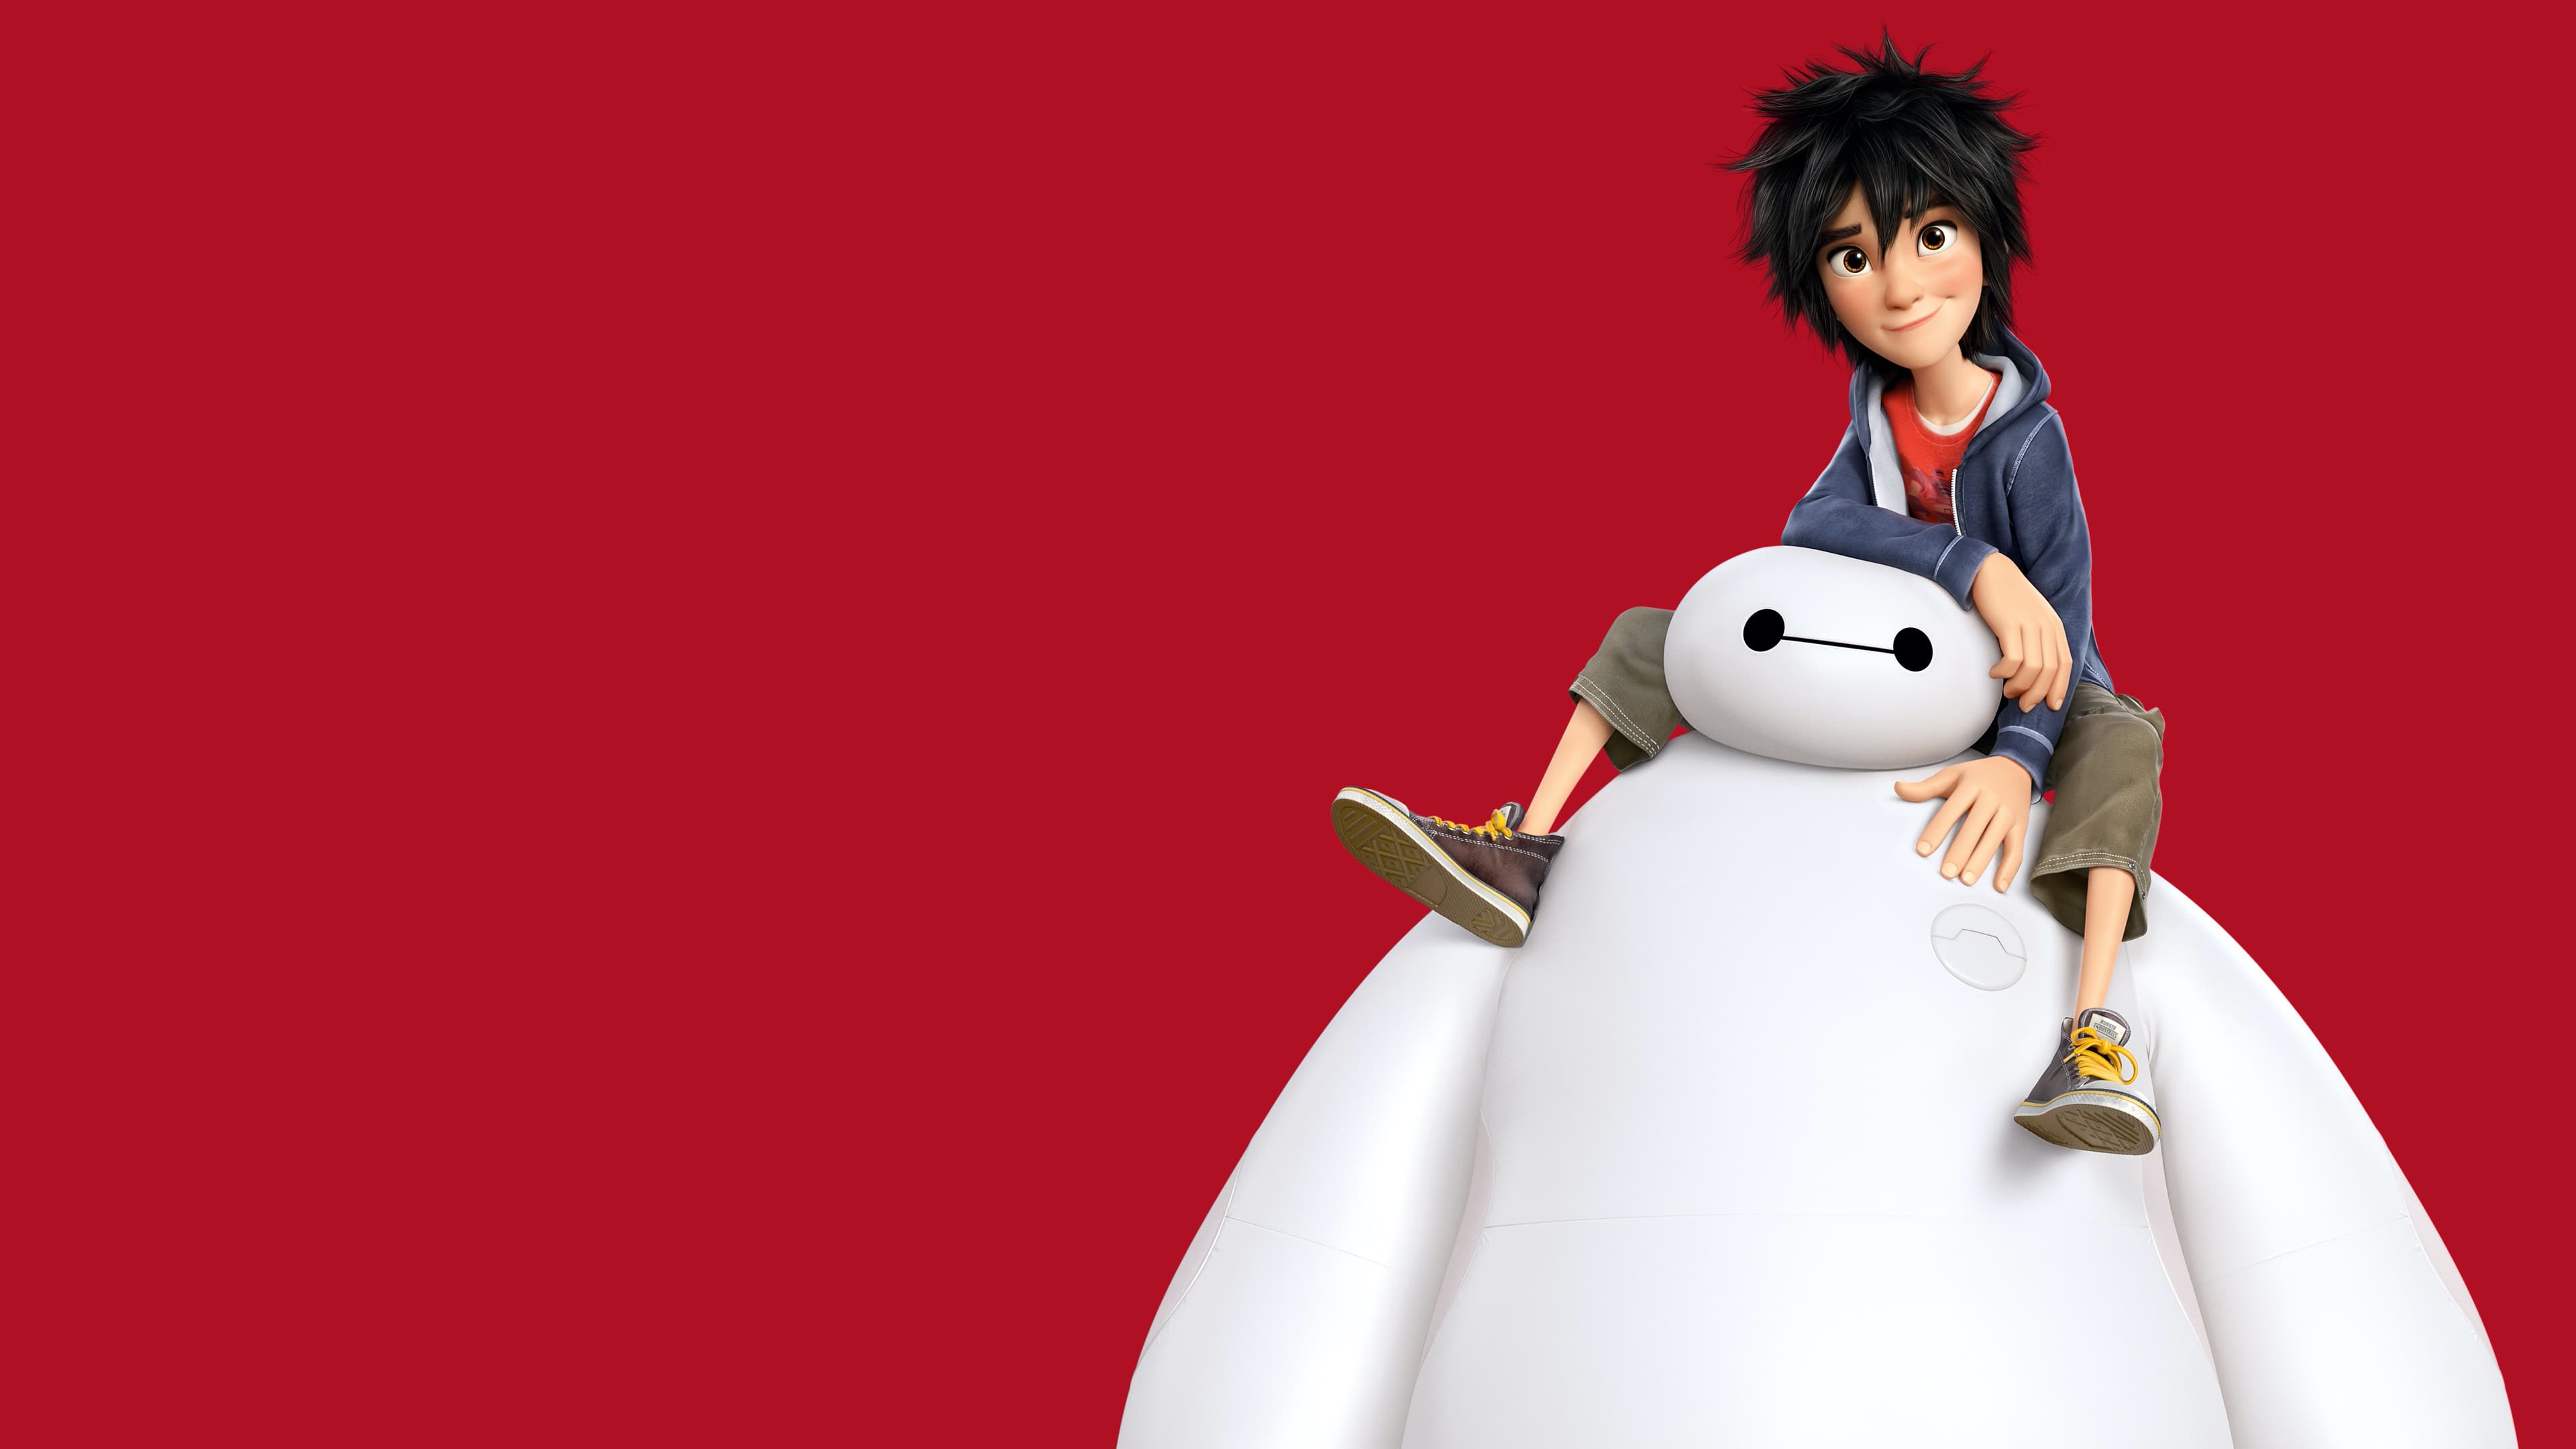 Share more than 65 baymax wallpaper latest - in.cdgdbentre